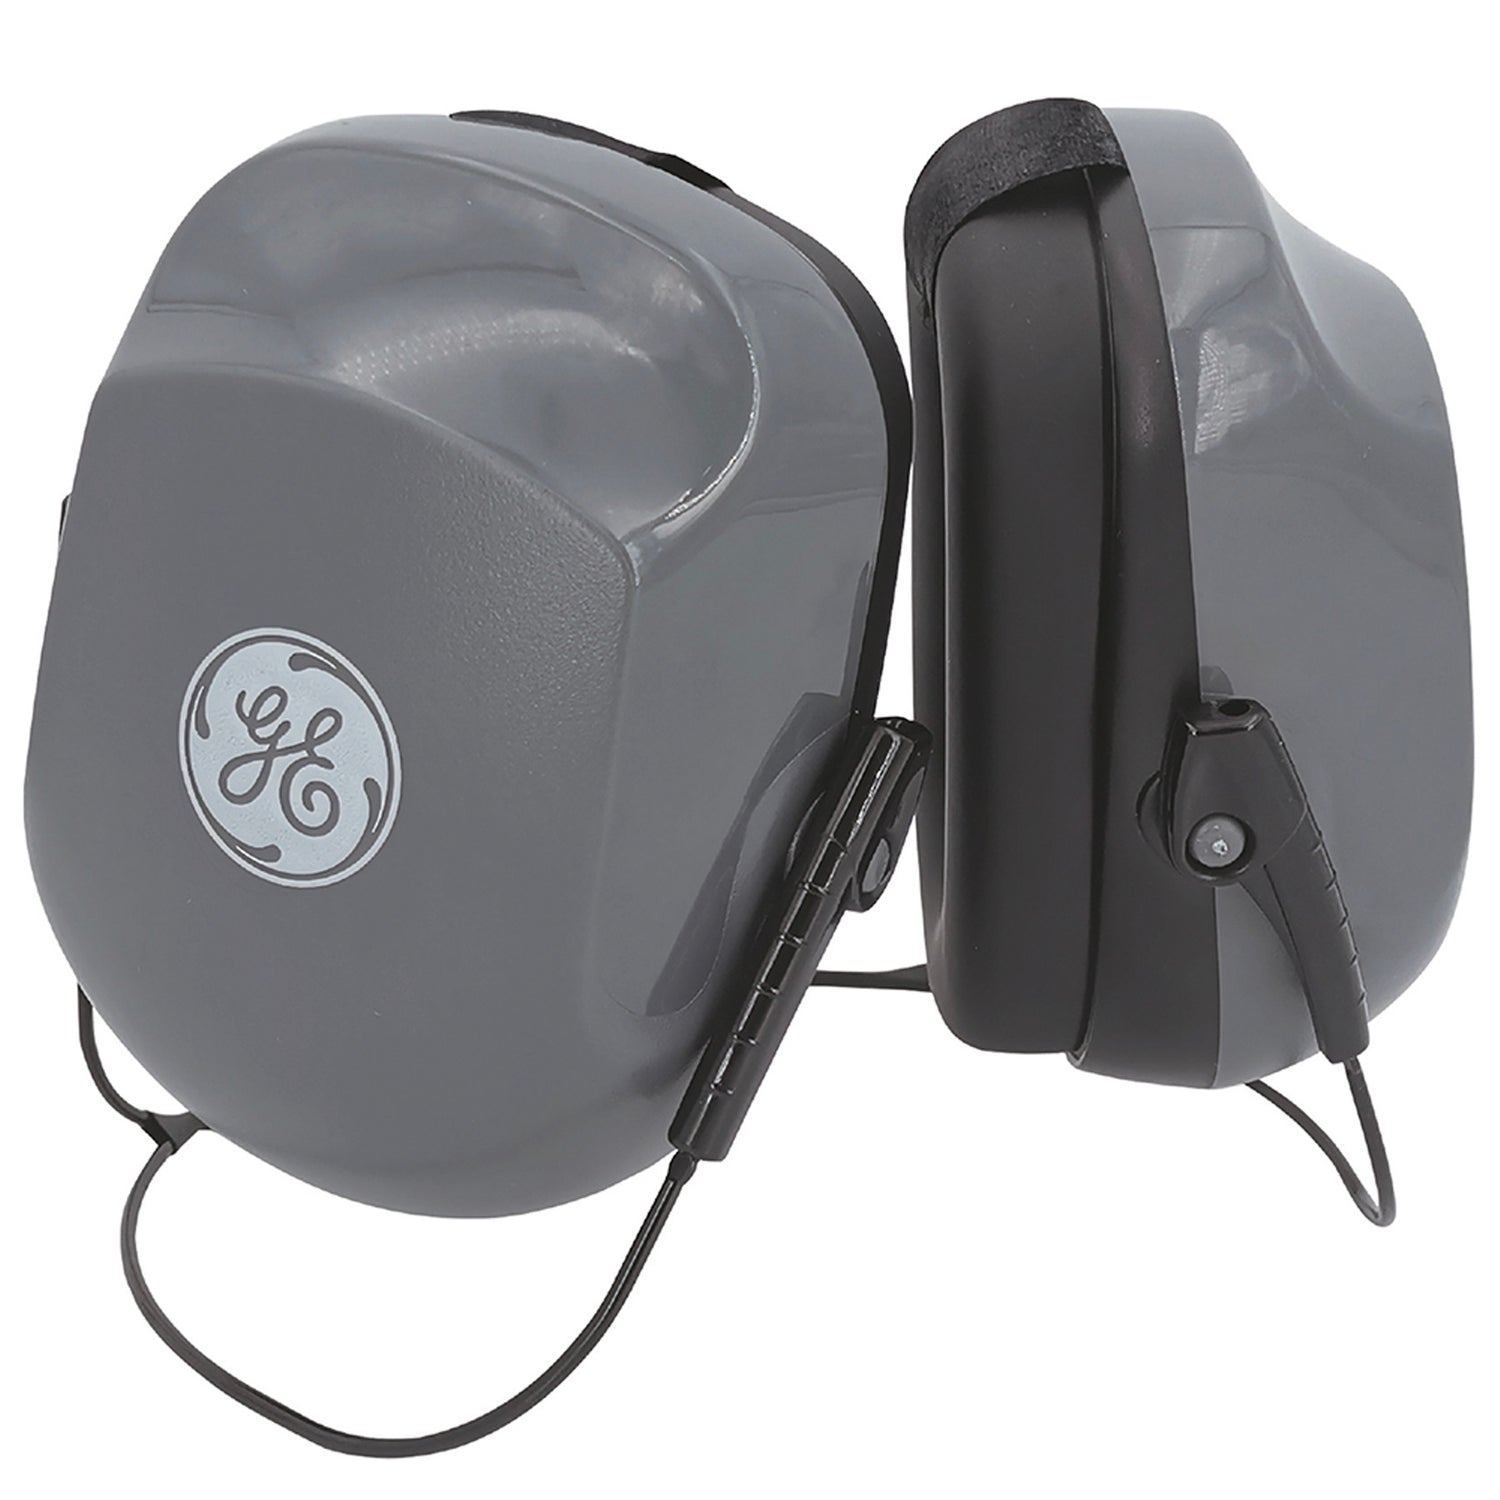 GE PPE Hearing Protection